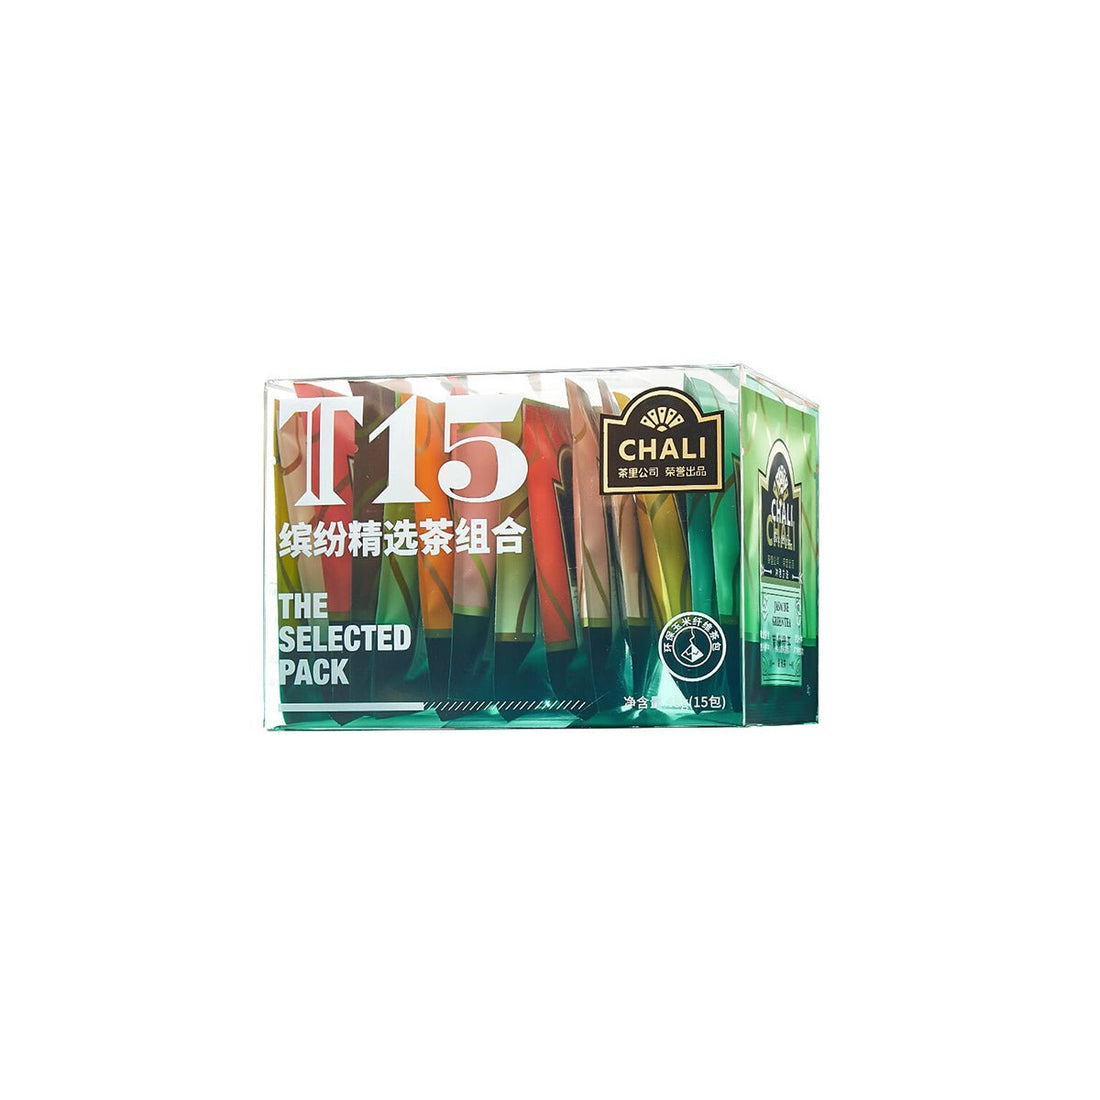 T15 15 Flavoured The Selected Pack 48g (15 Tea Bags) - 0cm